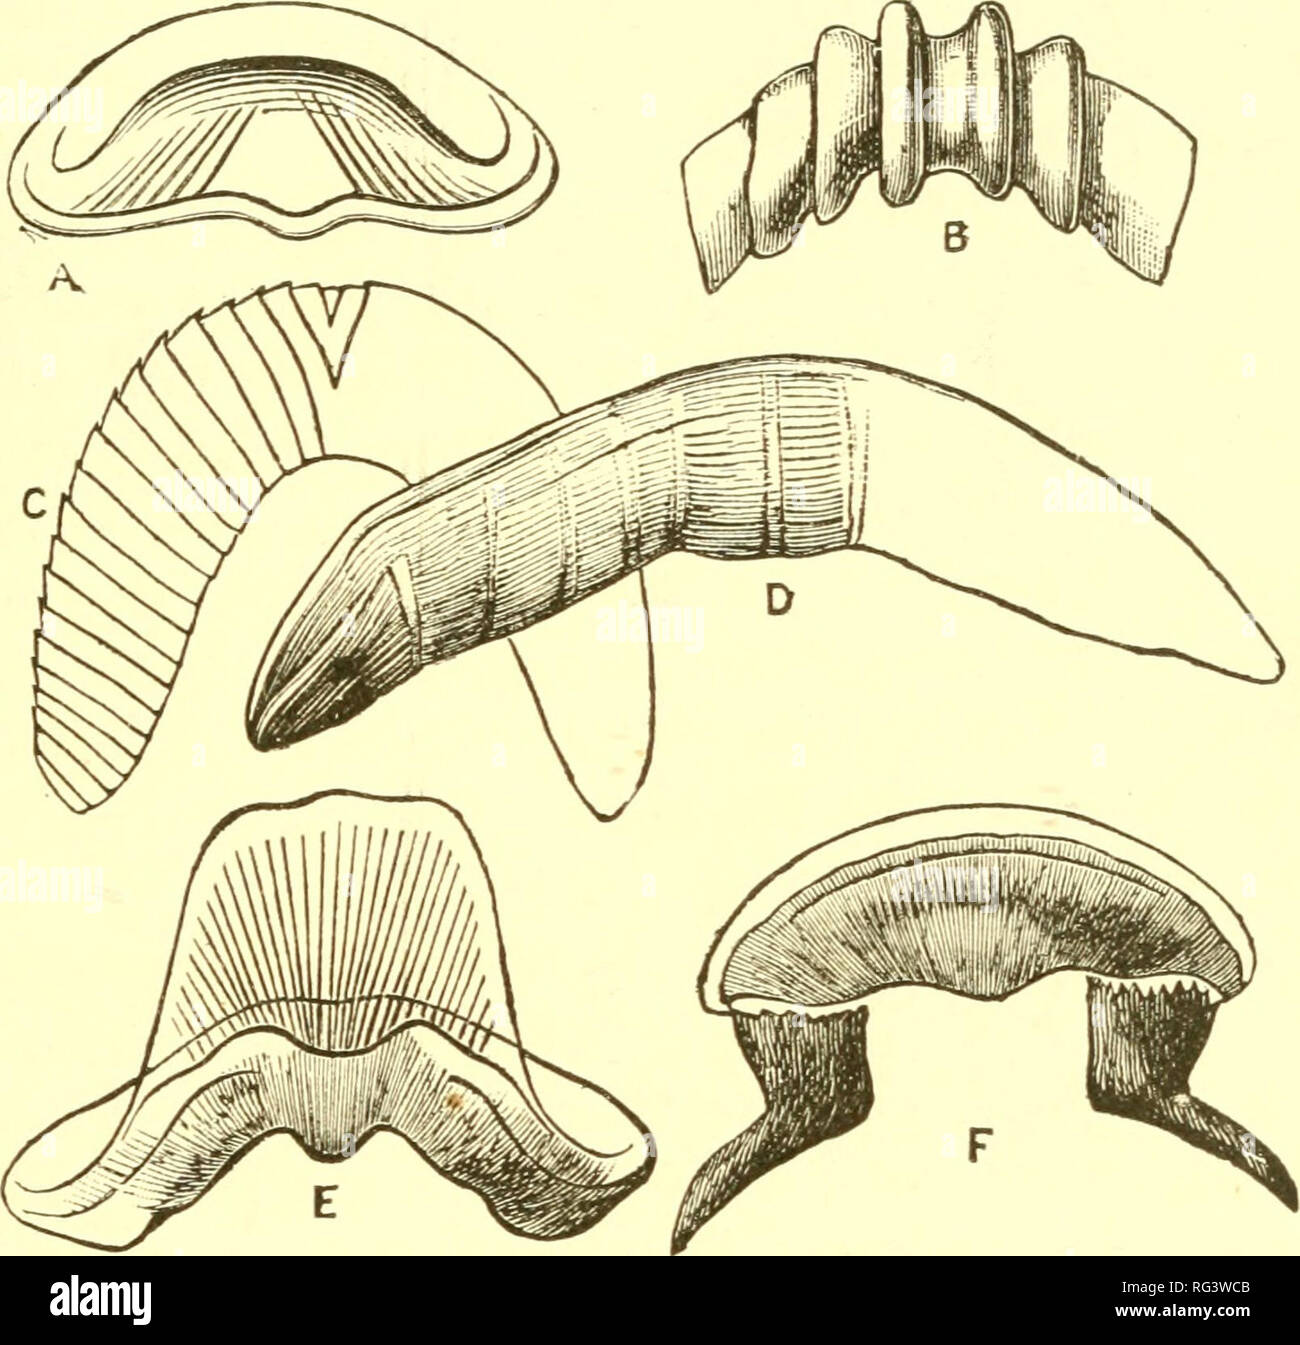 . The Cambridge natural history. Zoology; Zoologia Geral. VIII THE JAW IN PULMONATA 21 1 circular bites inflicted by a schoolboy upon his bread and butter. The jaw of Helix (Fig. 107, B) is arched in shape, and is strengthened by a number of projecting vertical ribs. That of Liinax (A) is straighter, and is slightly striated, without vertical ribs. In Bulimulus (C) the arch of the jaw is Yery conspicuous, and the upper edges are always denticulated : in OrthaUcus there is a central triangular plate with a number of overlapping plates on either side ; in Succinea (E) there is a large square acc Stock Photo